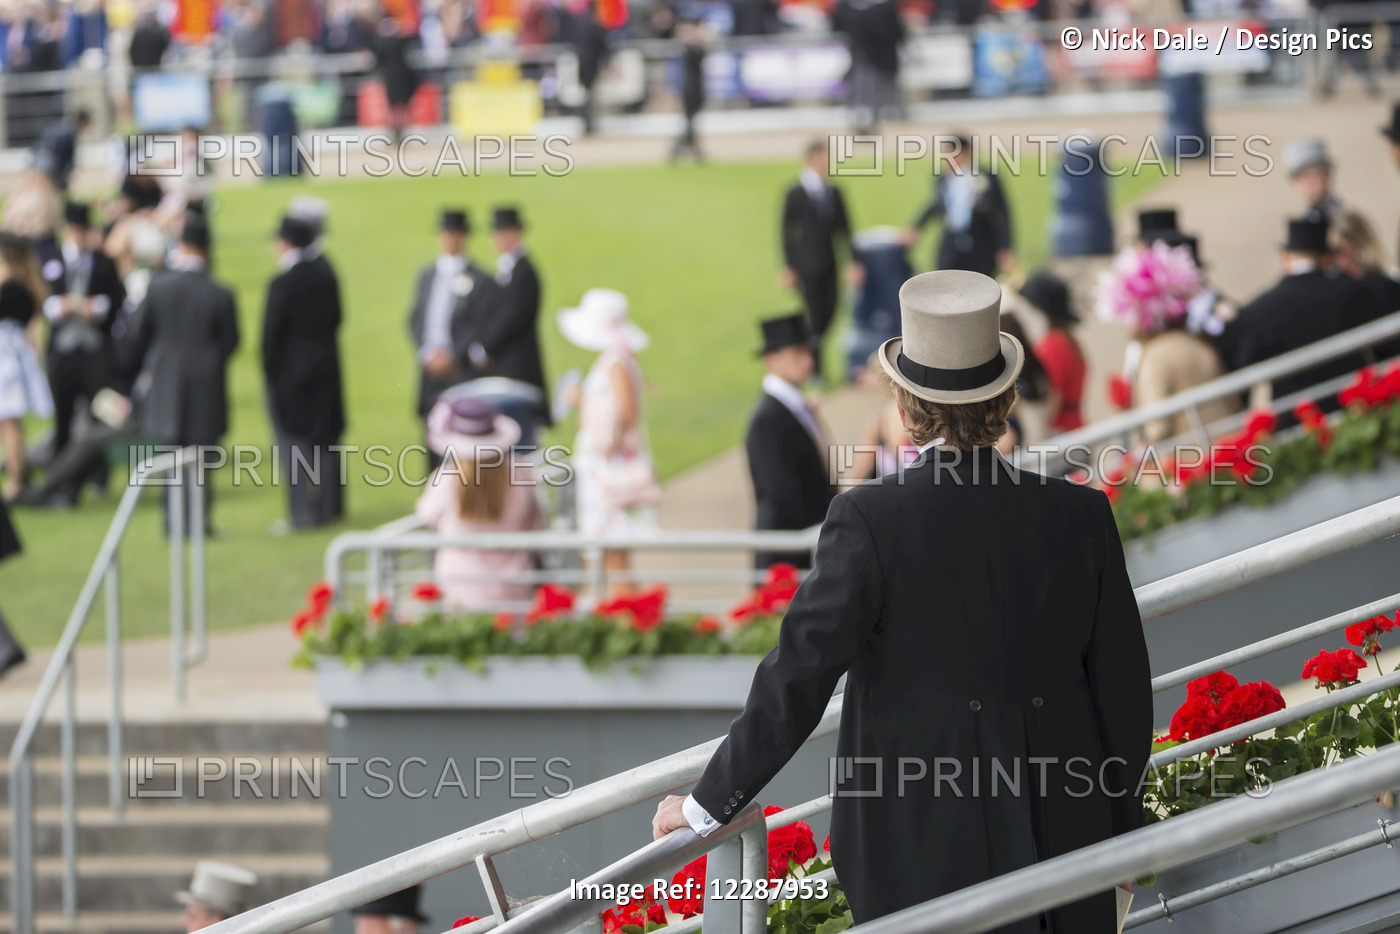 Seen From Behind In The Foreground, A Man In Black Tails And A Grey Top Hat Is ...